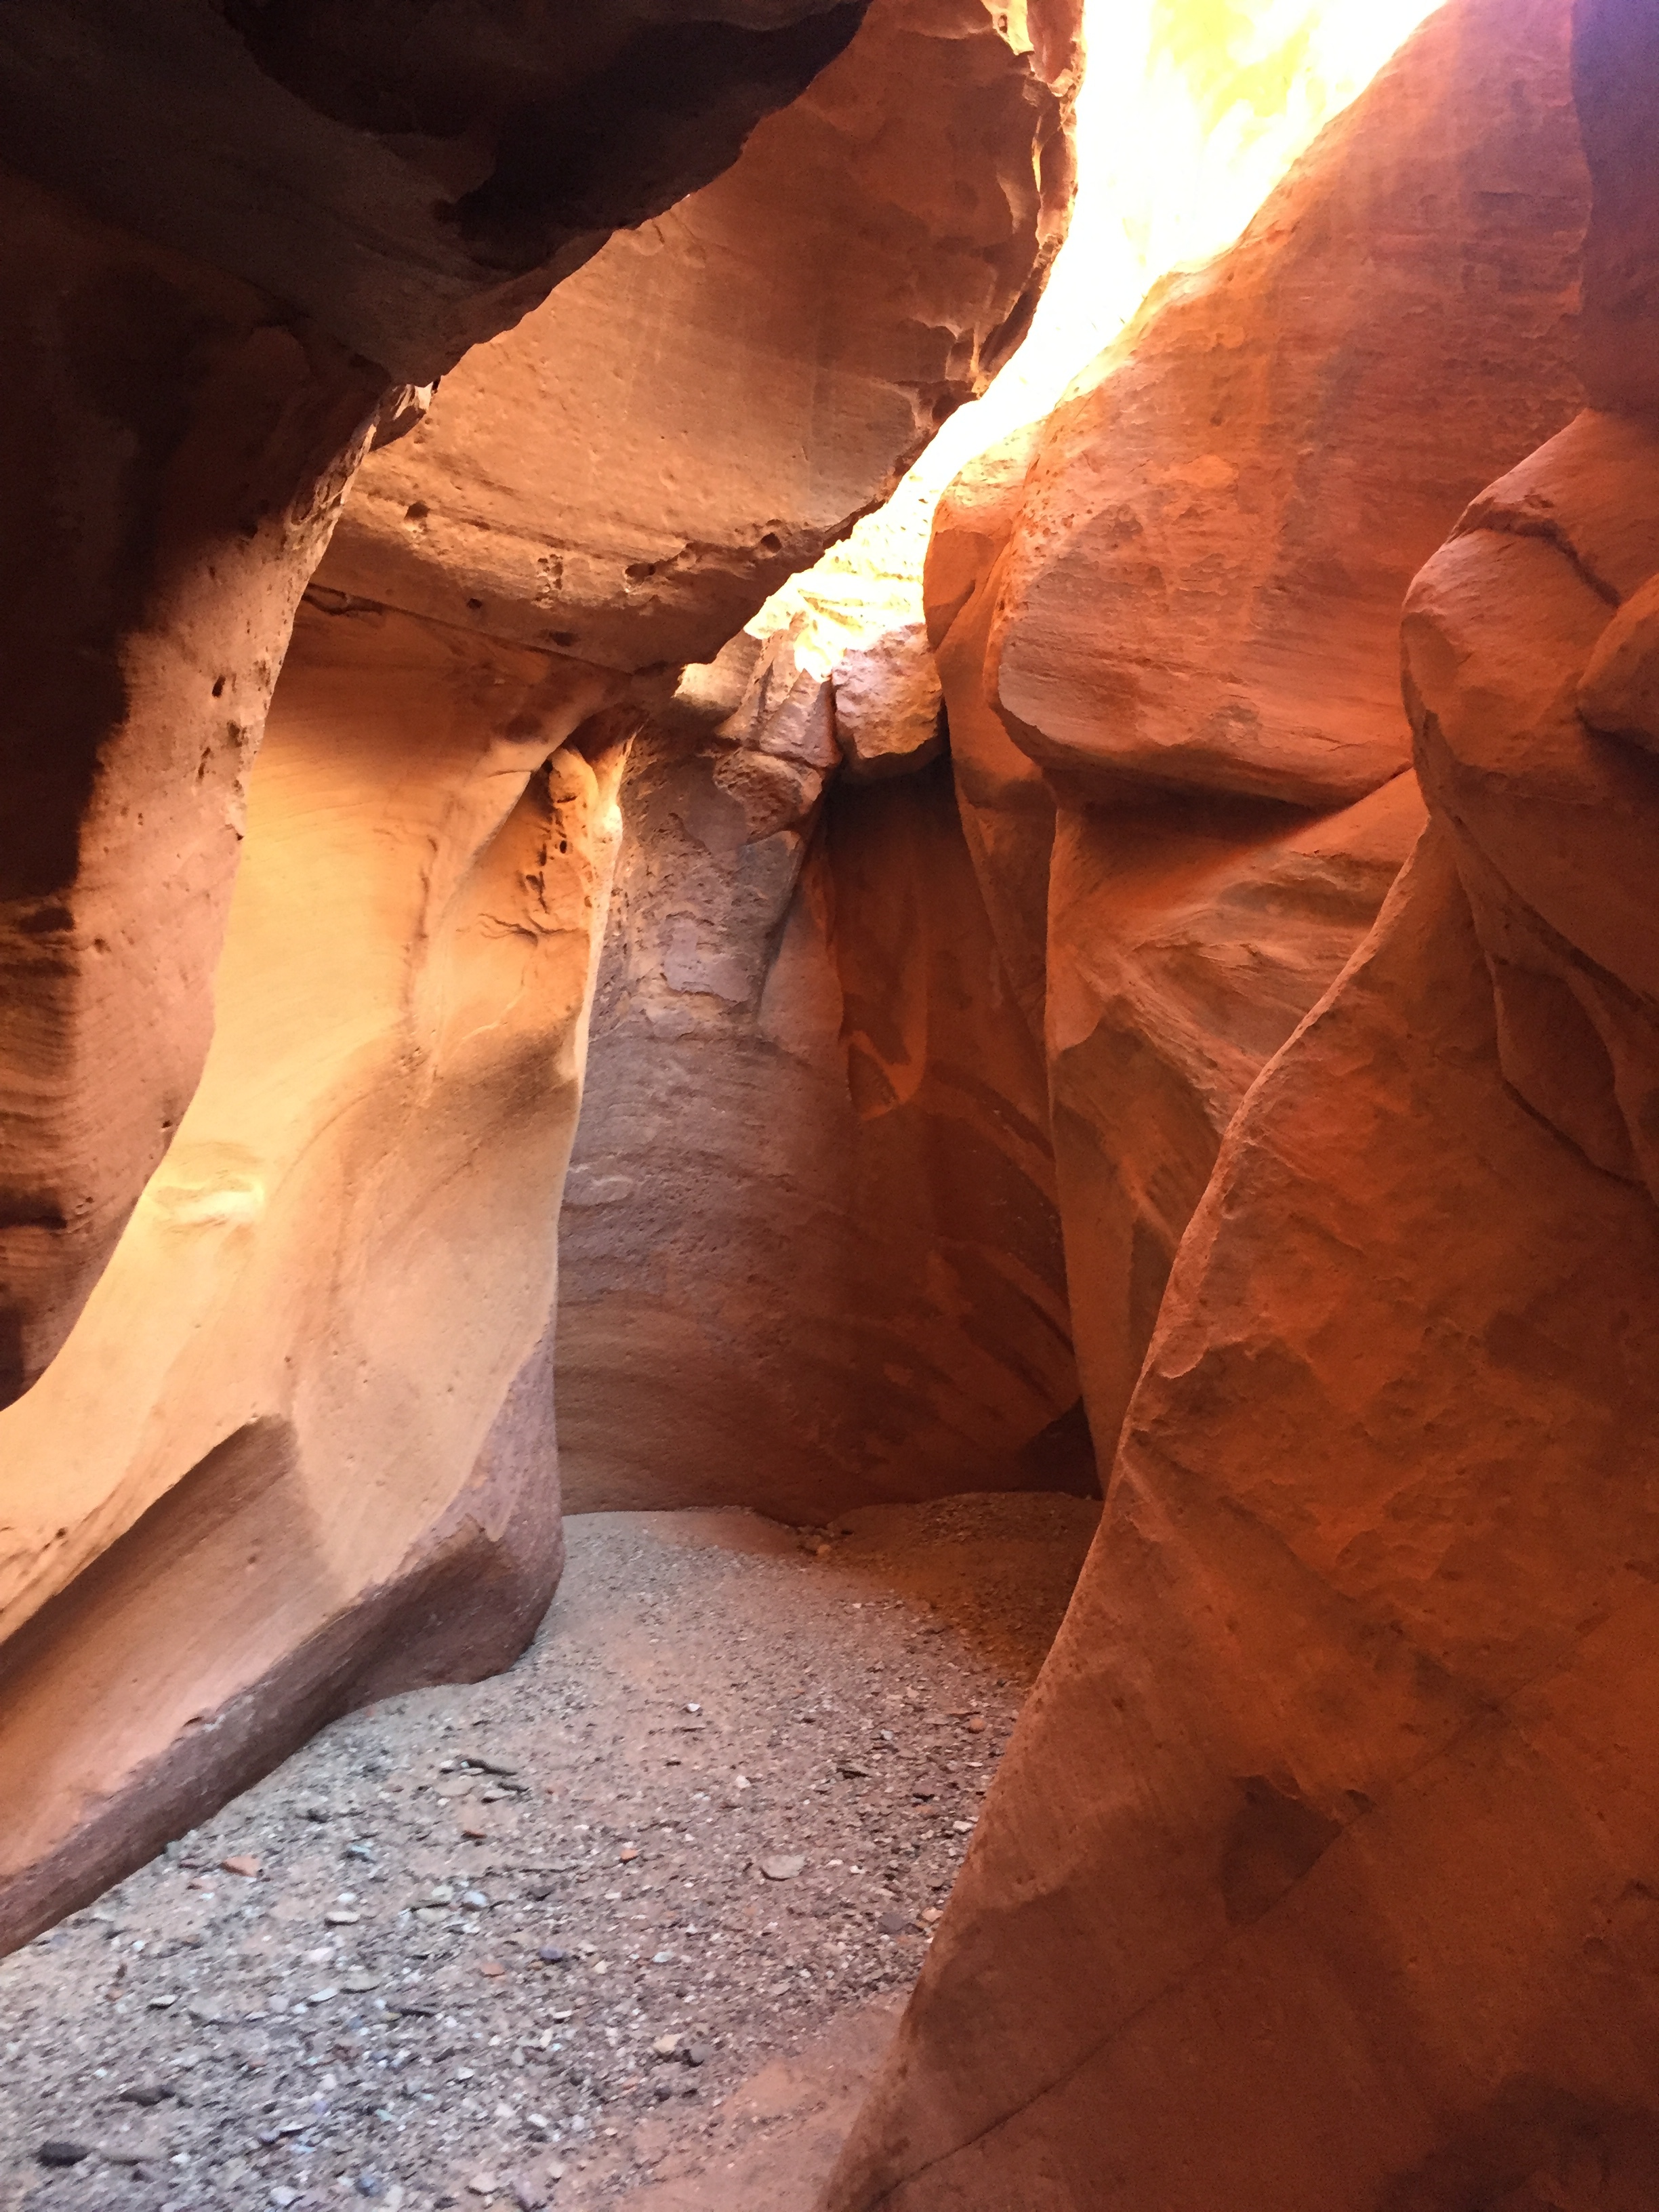   AUGUST, 2017 – CAPITOL REEF NATIONAL PARK: Many areas of the park feature slot canyons, formed by rapid rainfall cutting down through the soft sandstone.  